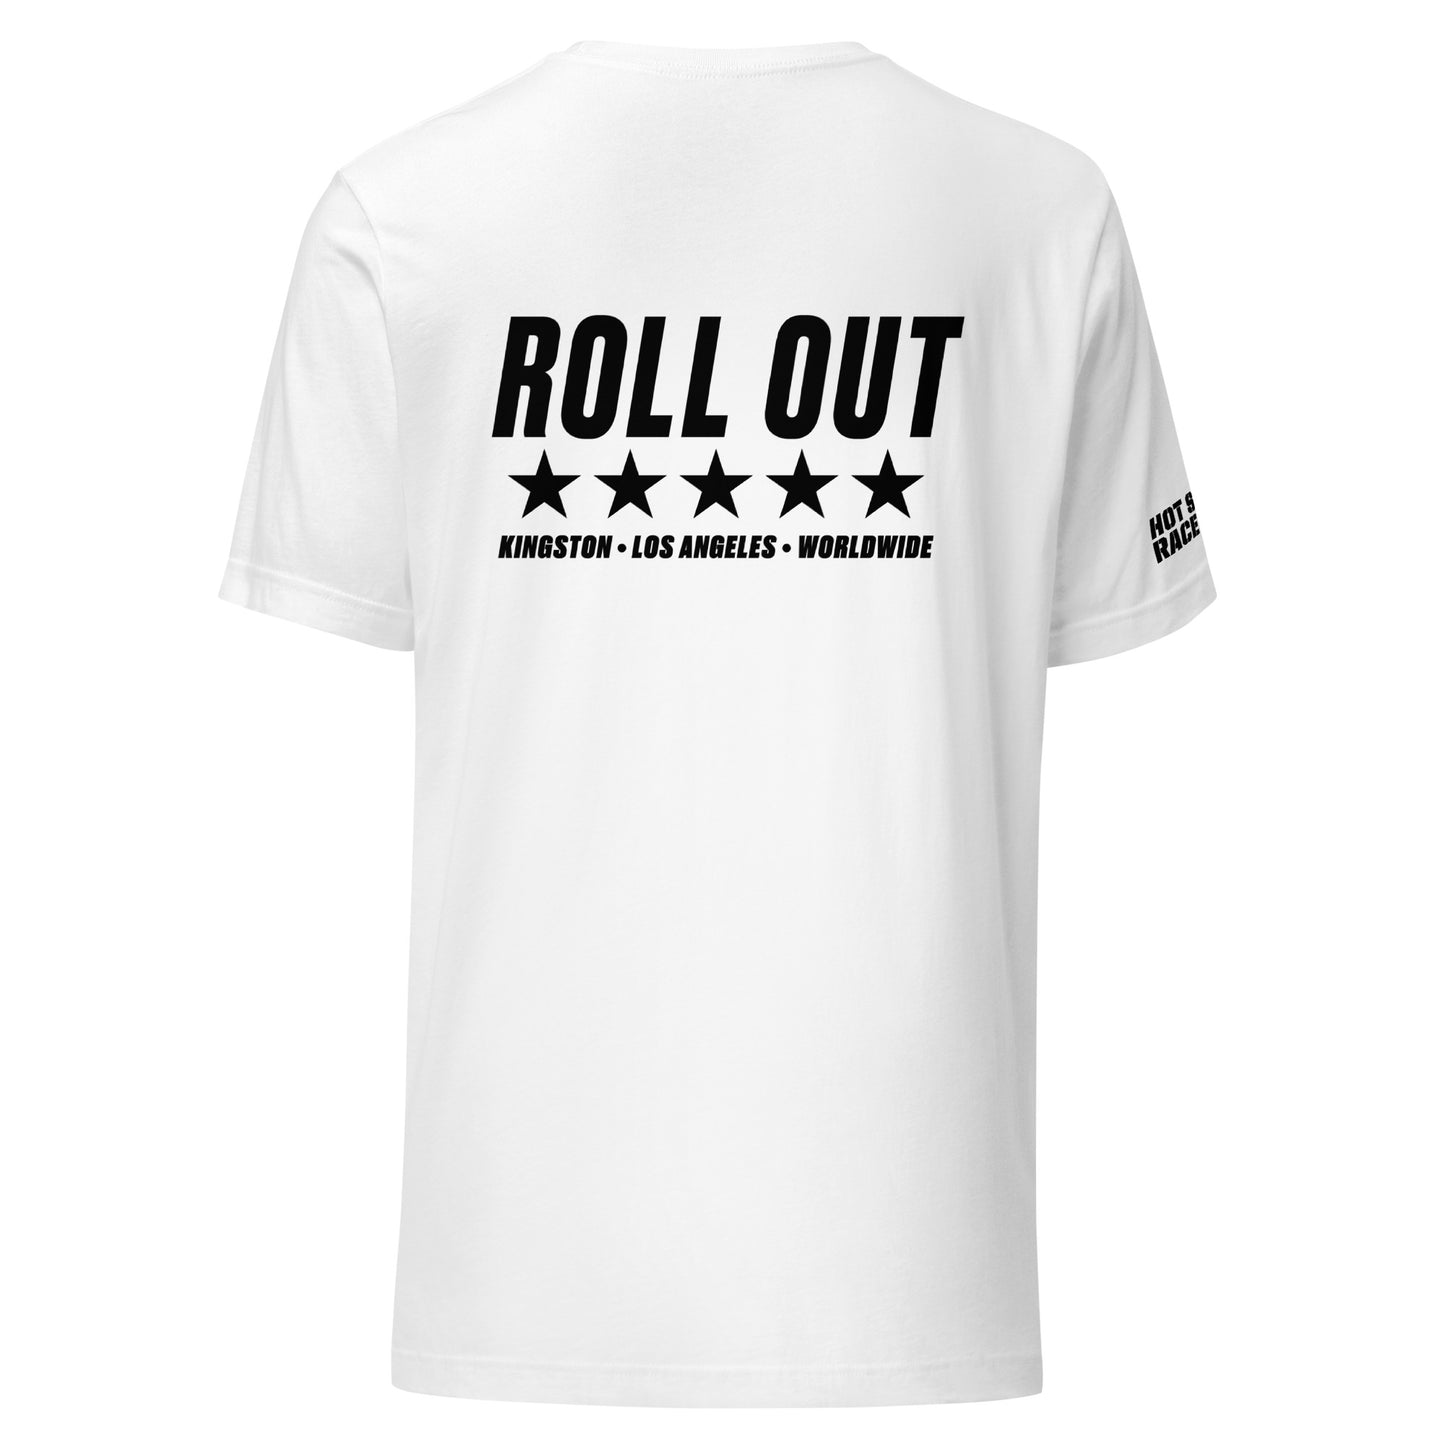 Roll Out Racer Tee - White / Black